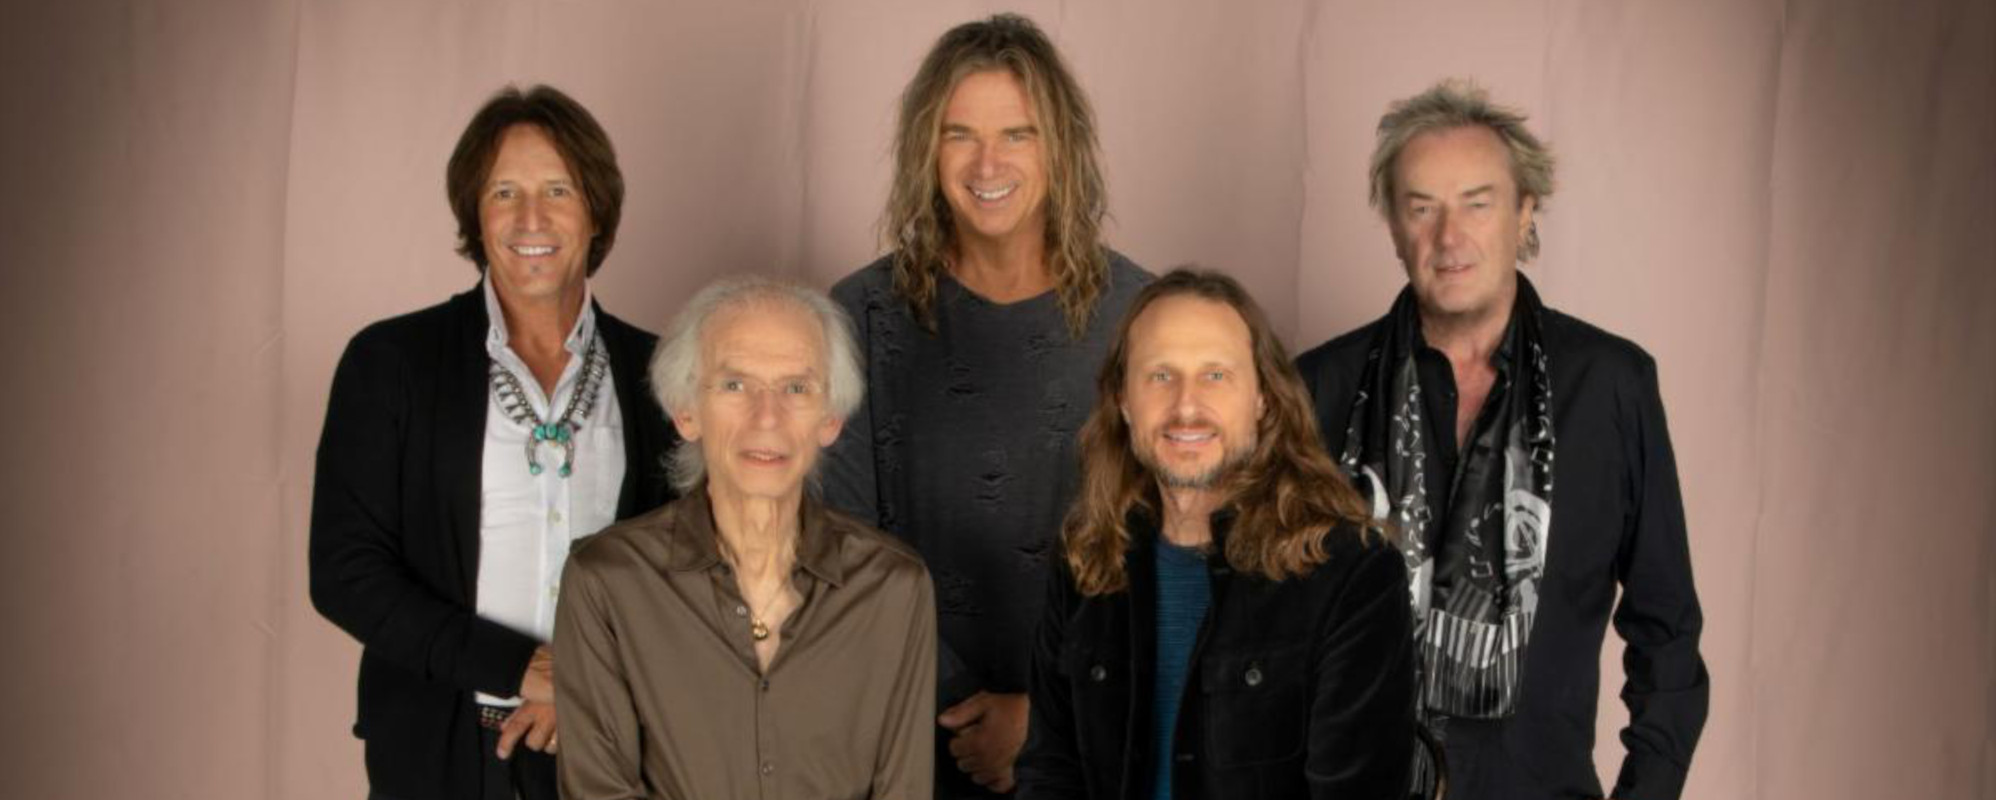 Yes Releases New Single “All Connected” Ahead of New LP ‘Mirror to the Sky’